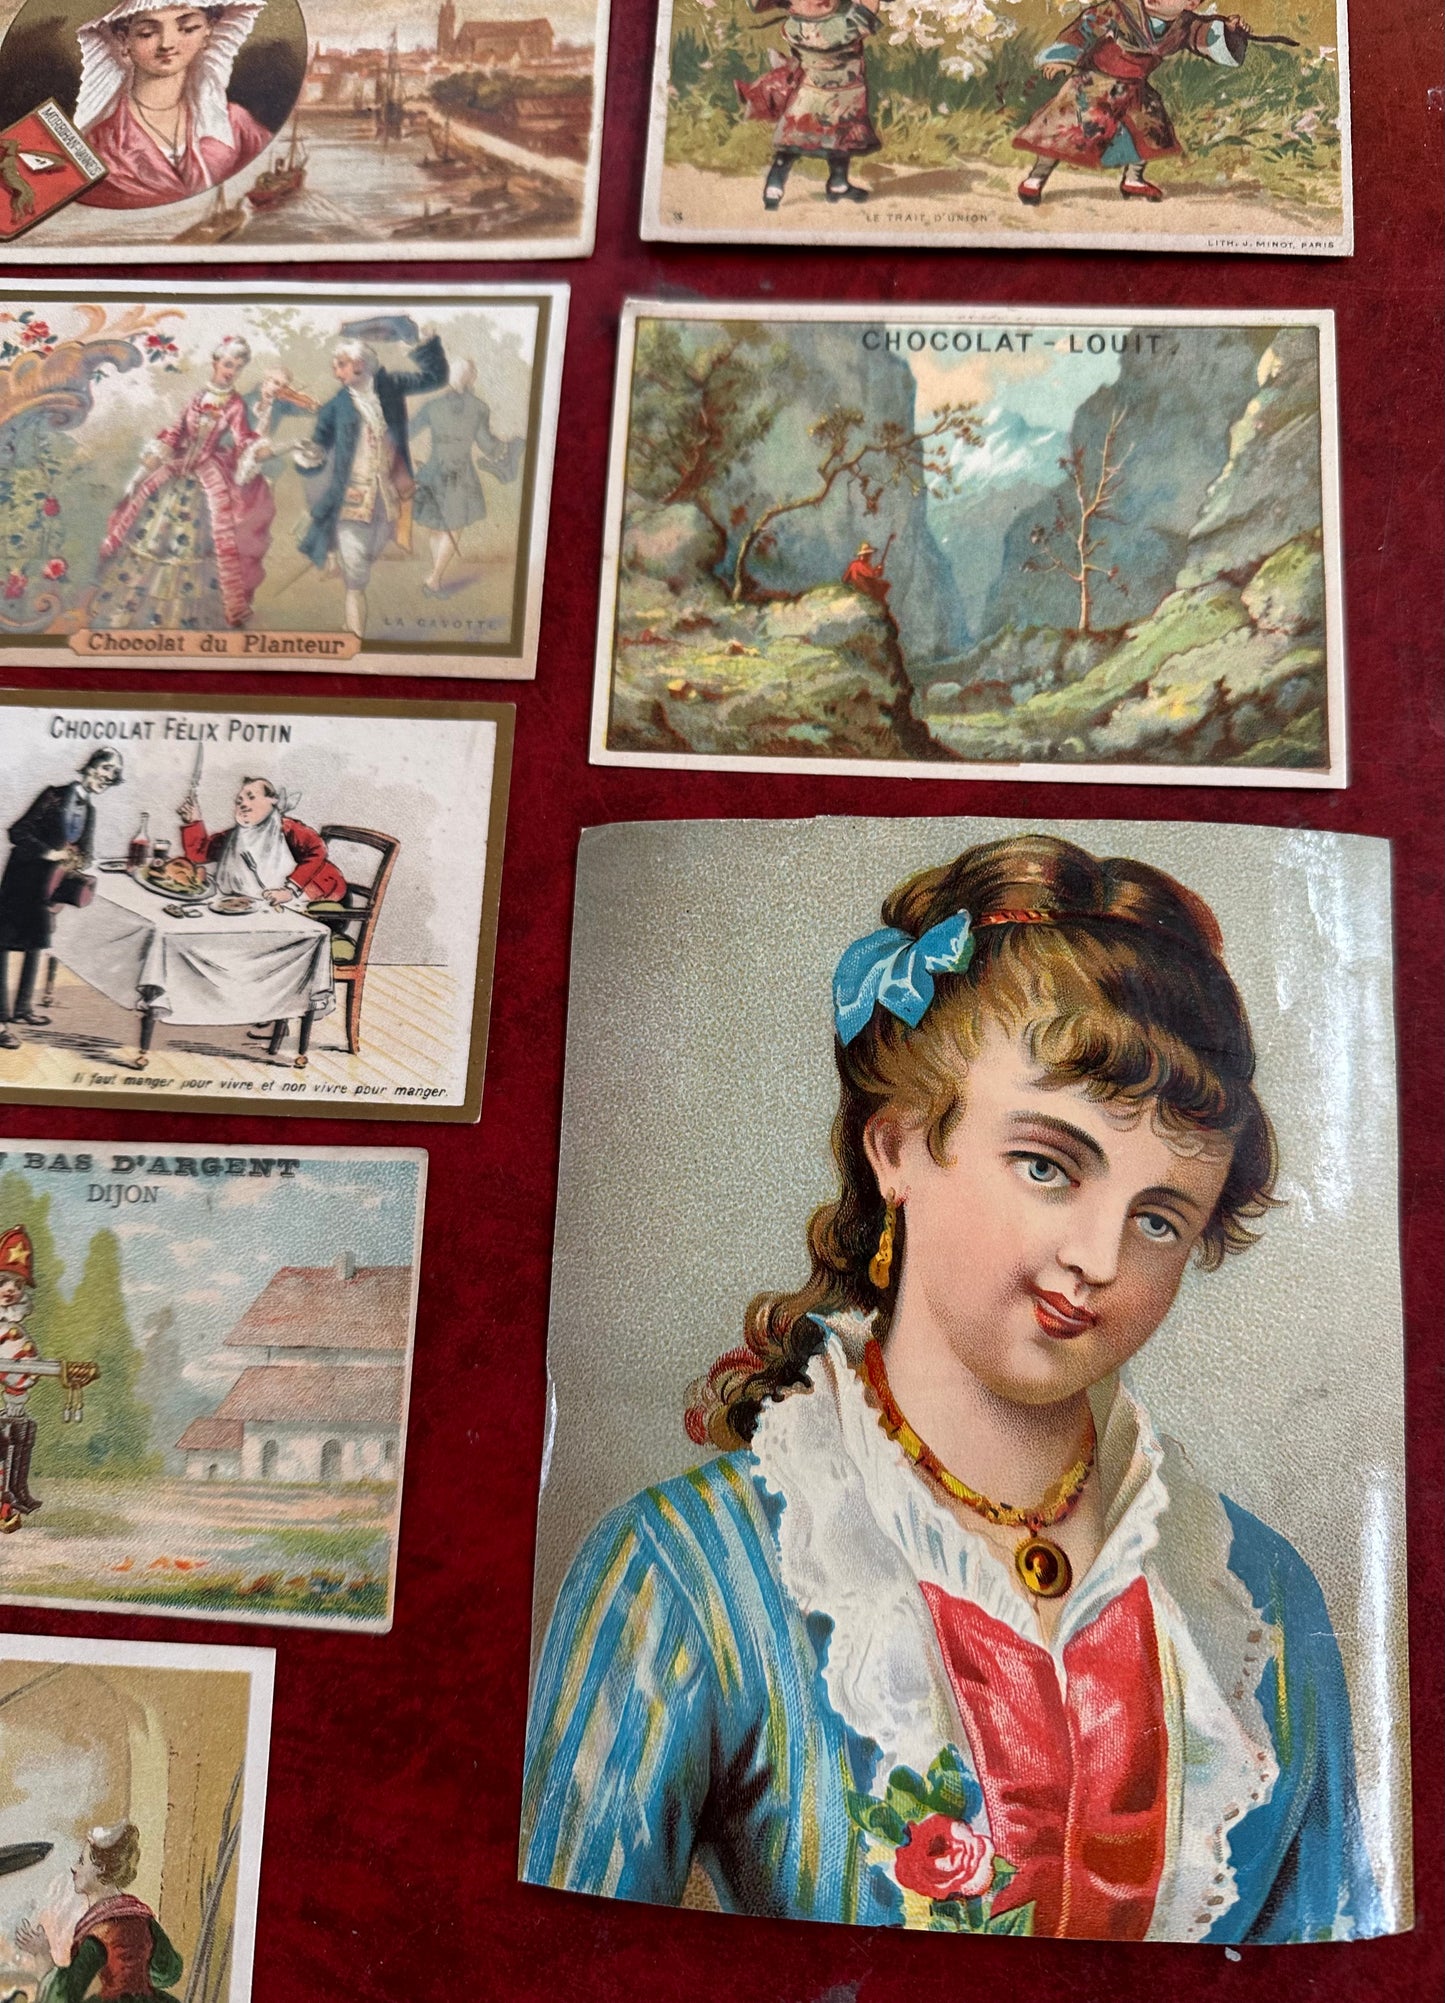 Collection of 17 French trade cards + One large album decoupage cut (1880s-1890s)